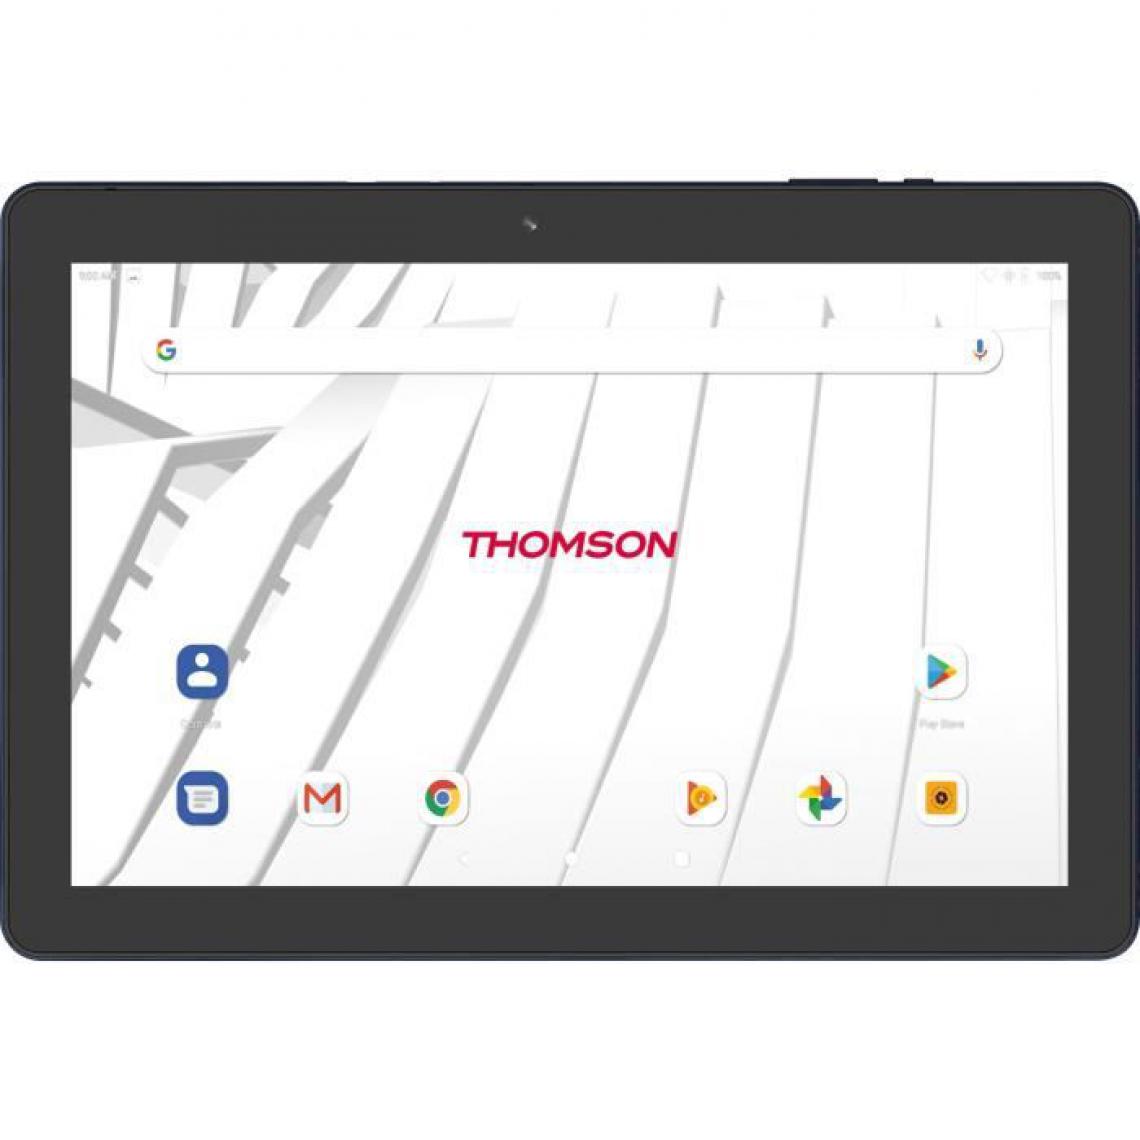 Thomson - Tablette Tactile - THOMSON - TEOX10-3BK64 - 10,1 HD - Quad Core ARM Cortex A53 - RAM 3 Go - Stockage 64 Go Emmc - Android 10 - Tablette Android